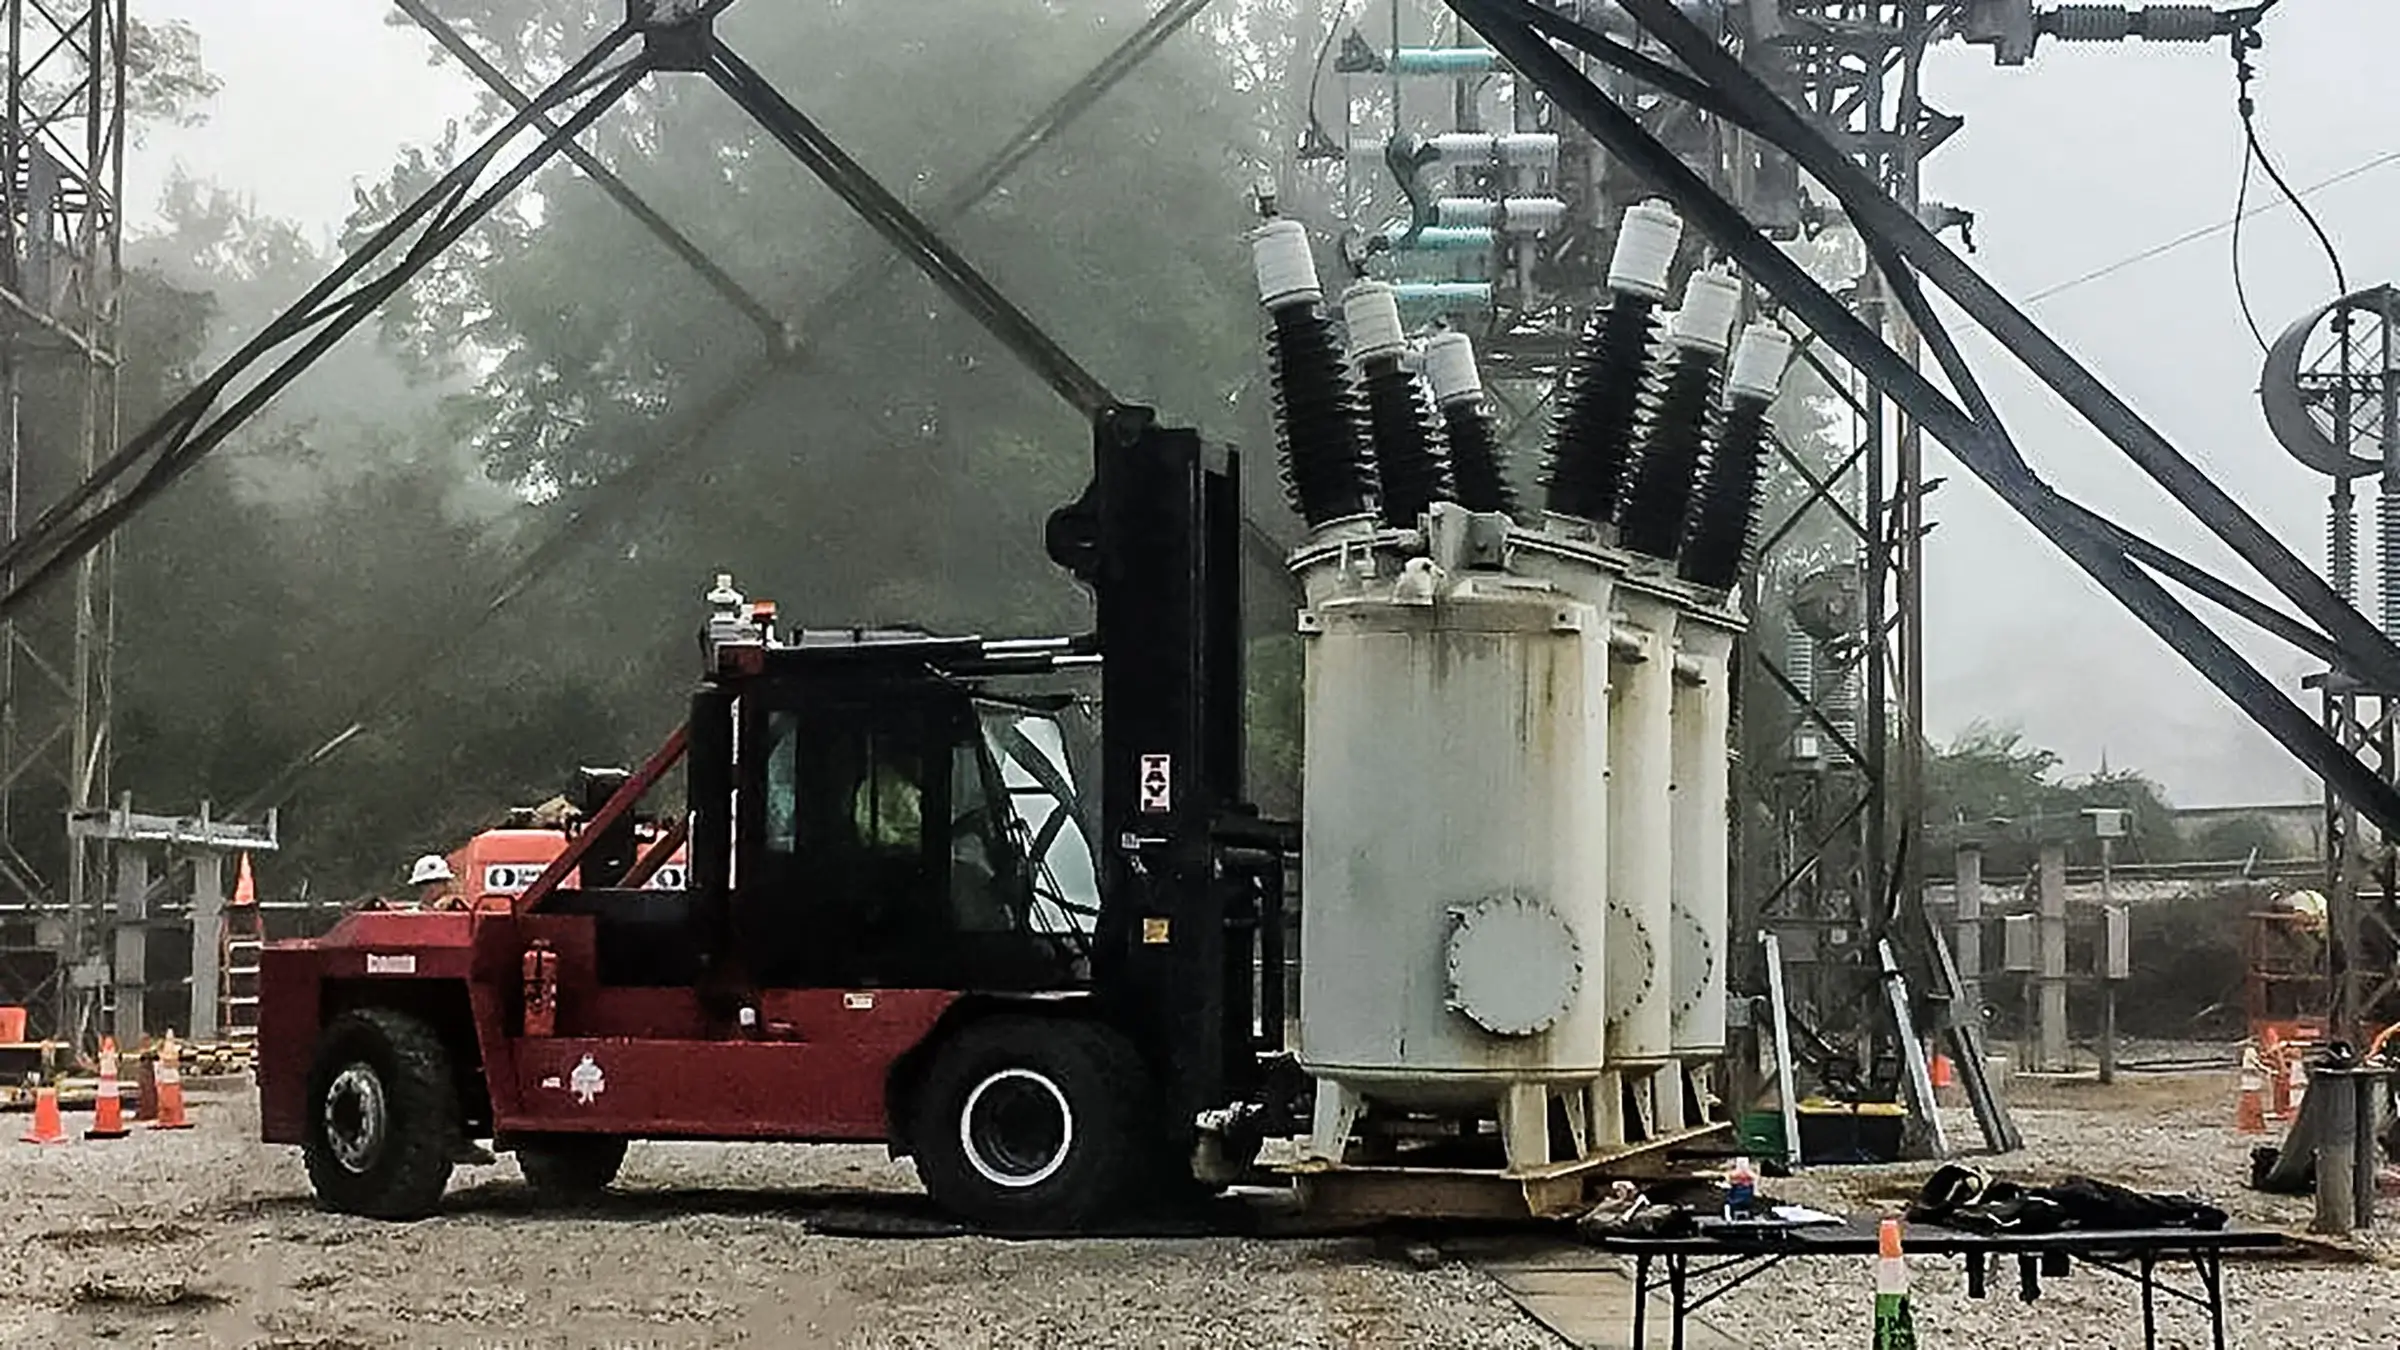 A forklift carries substation equipment on a jobsite